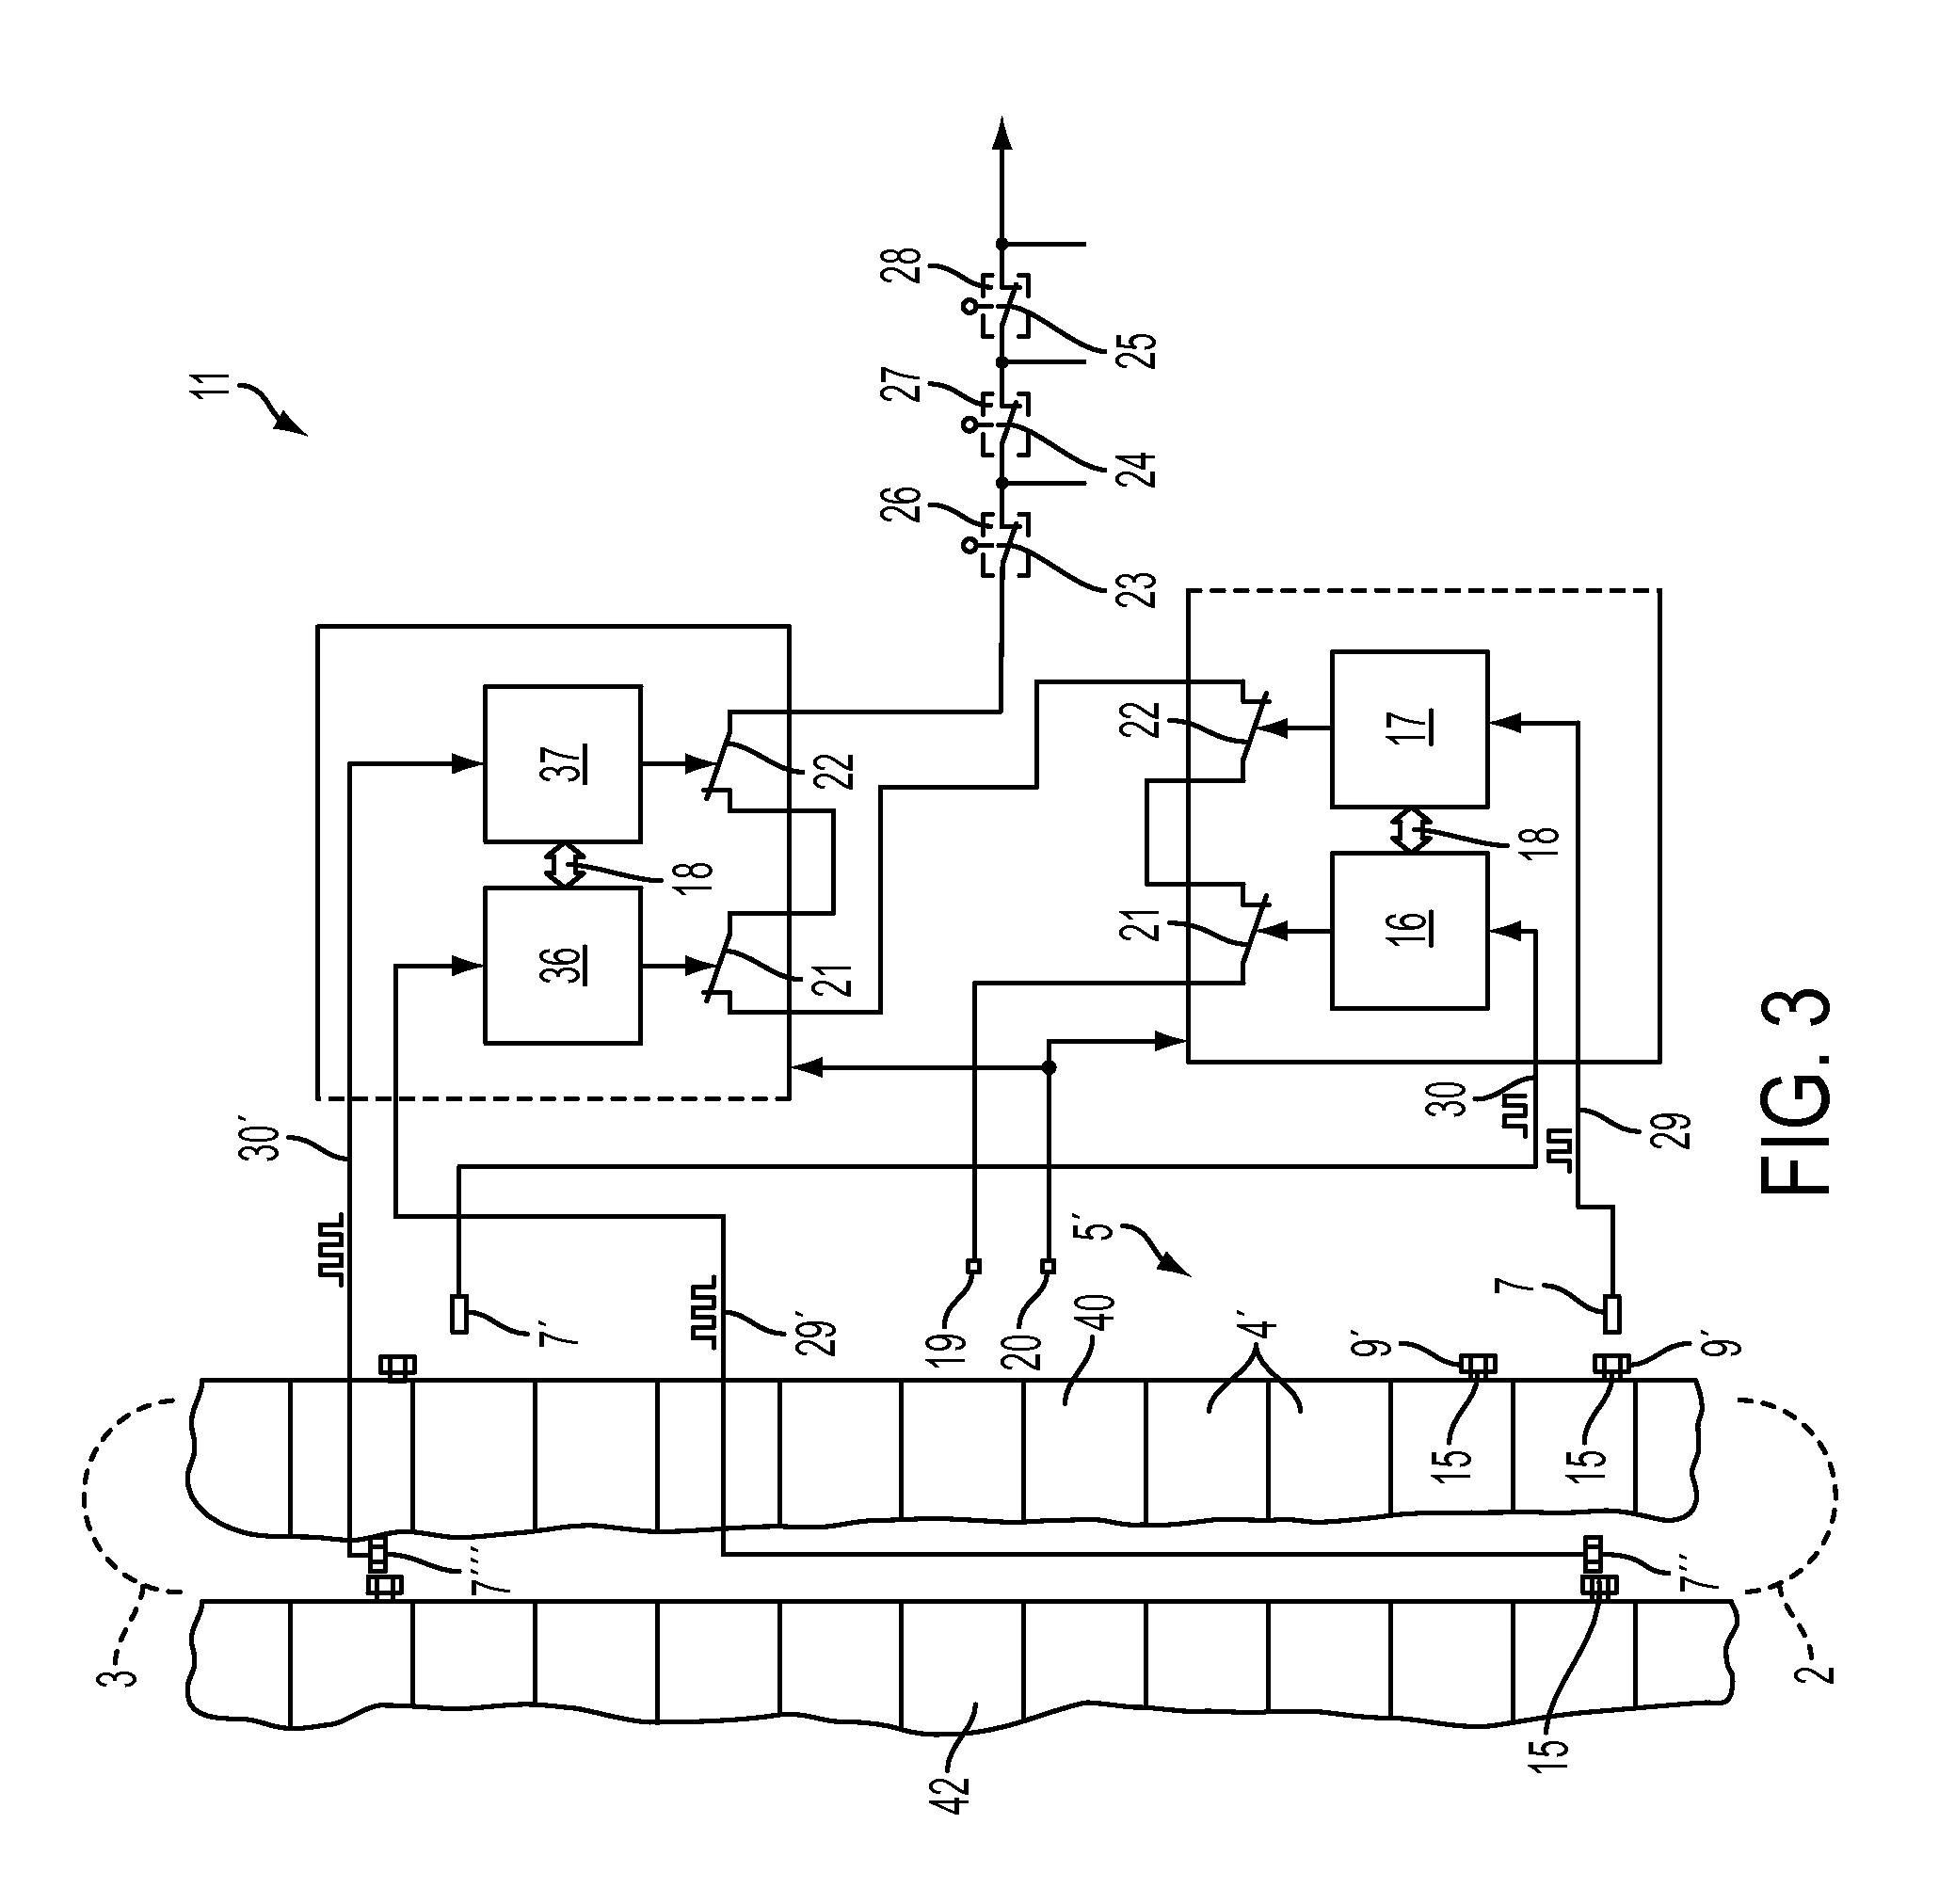 Device and method for monitoring an escalator or moving walkway